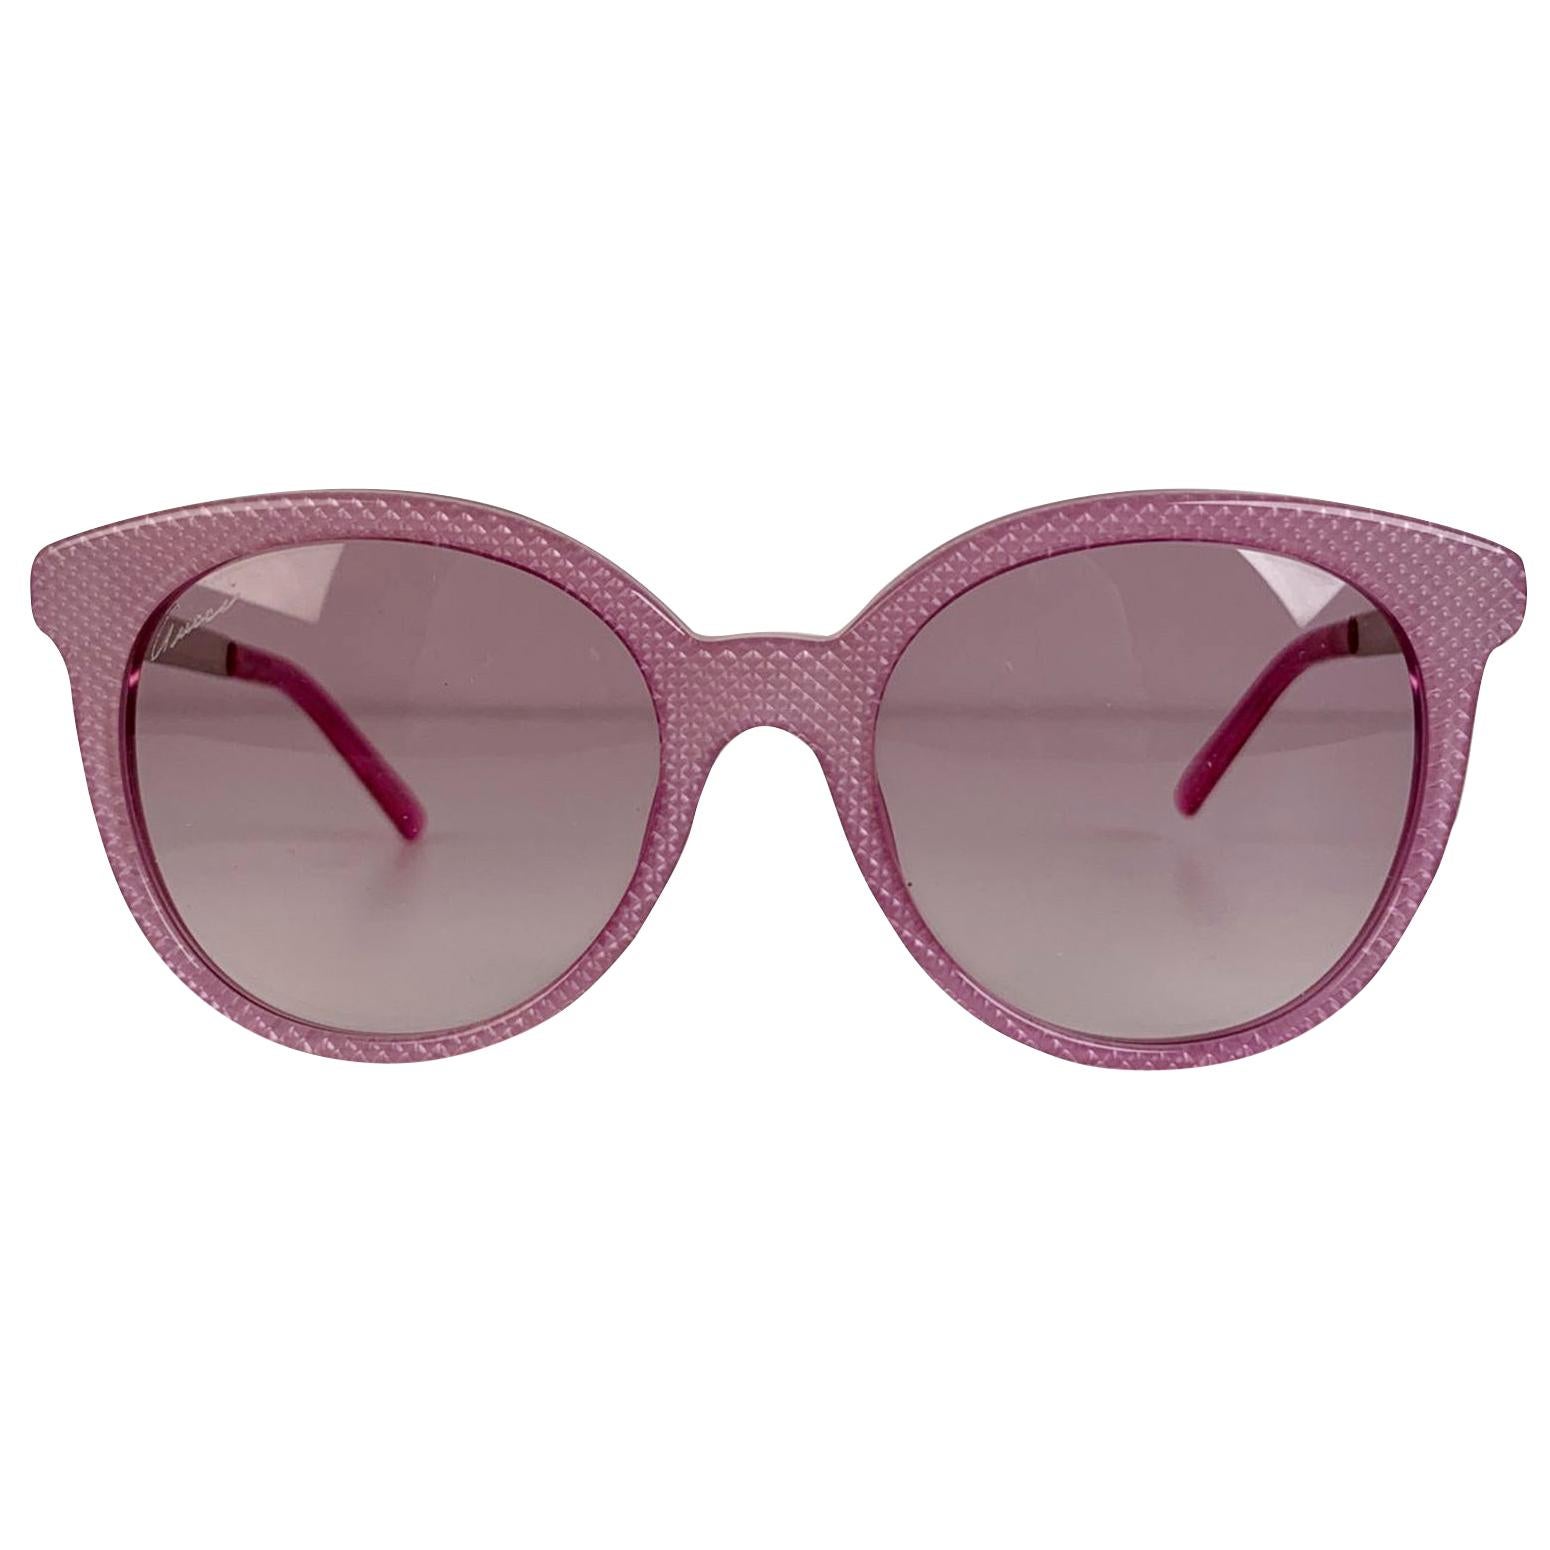 Gucci Pink Acetate Sunglasses GG3674 S 53/19 with Case